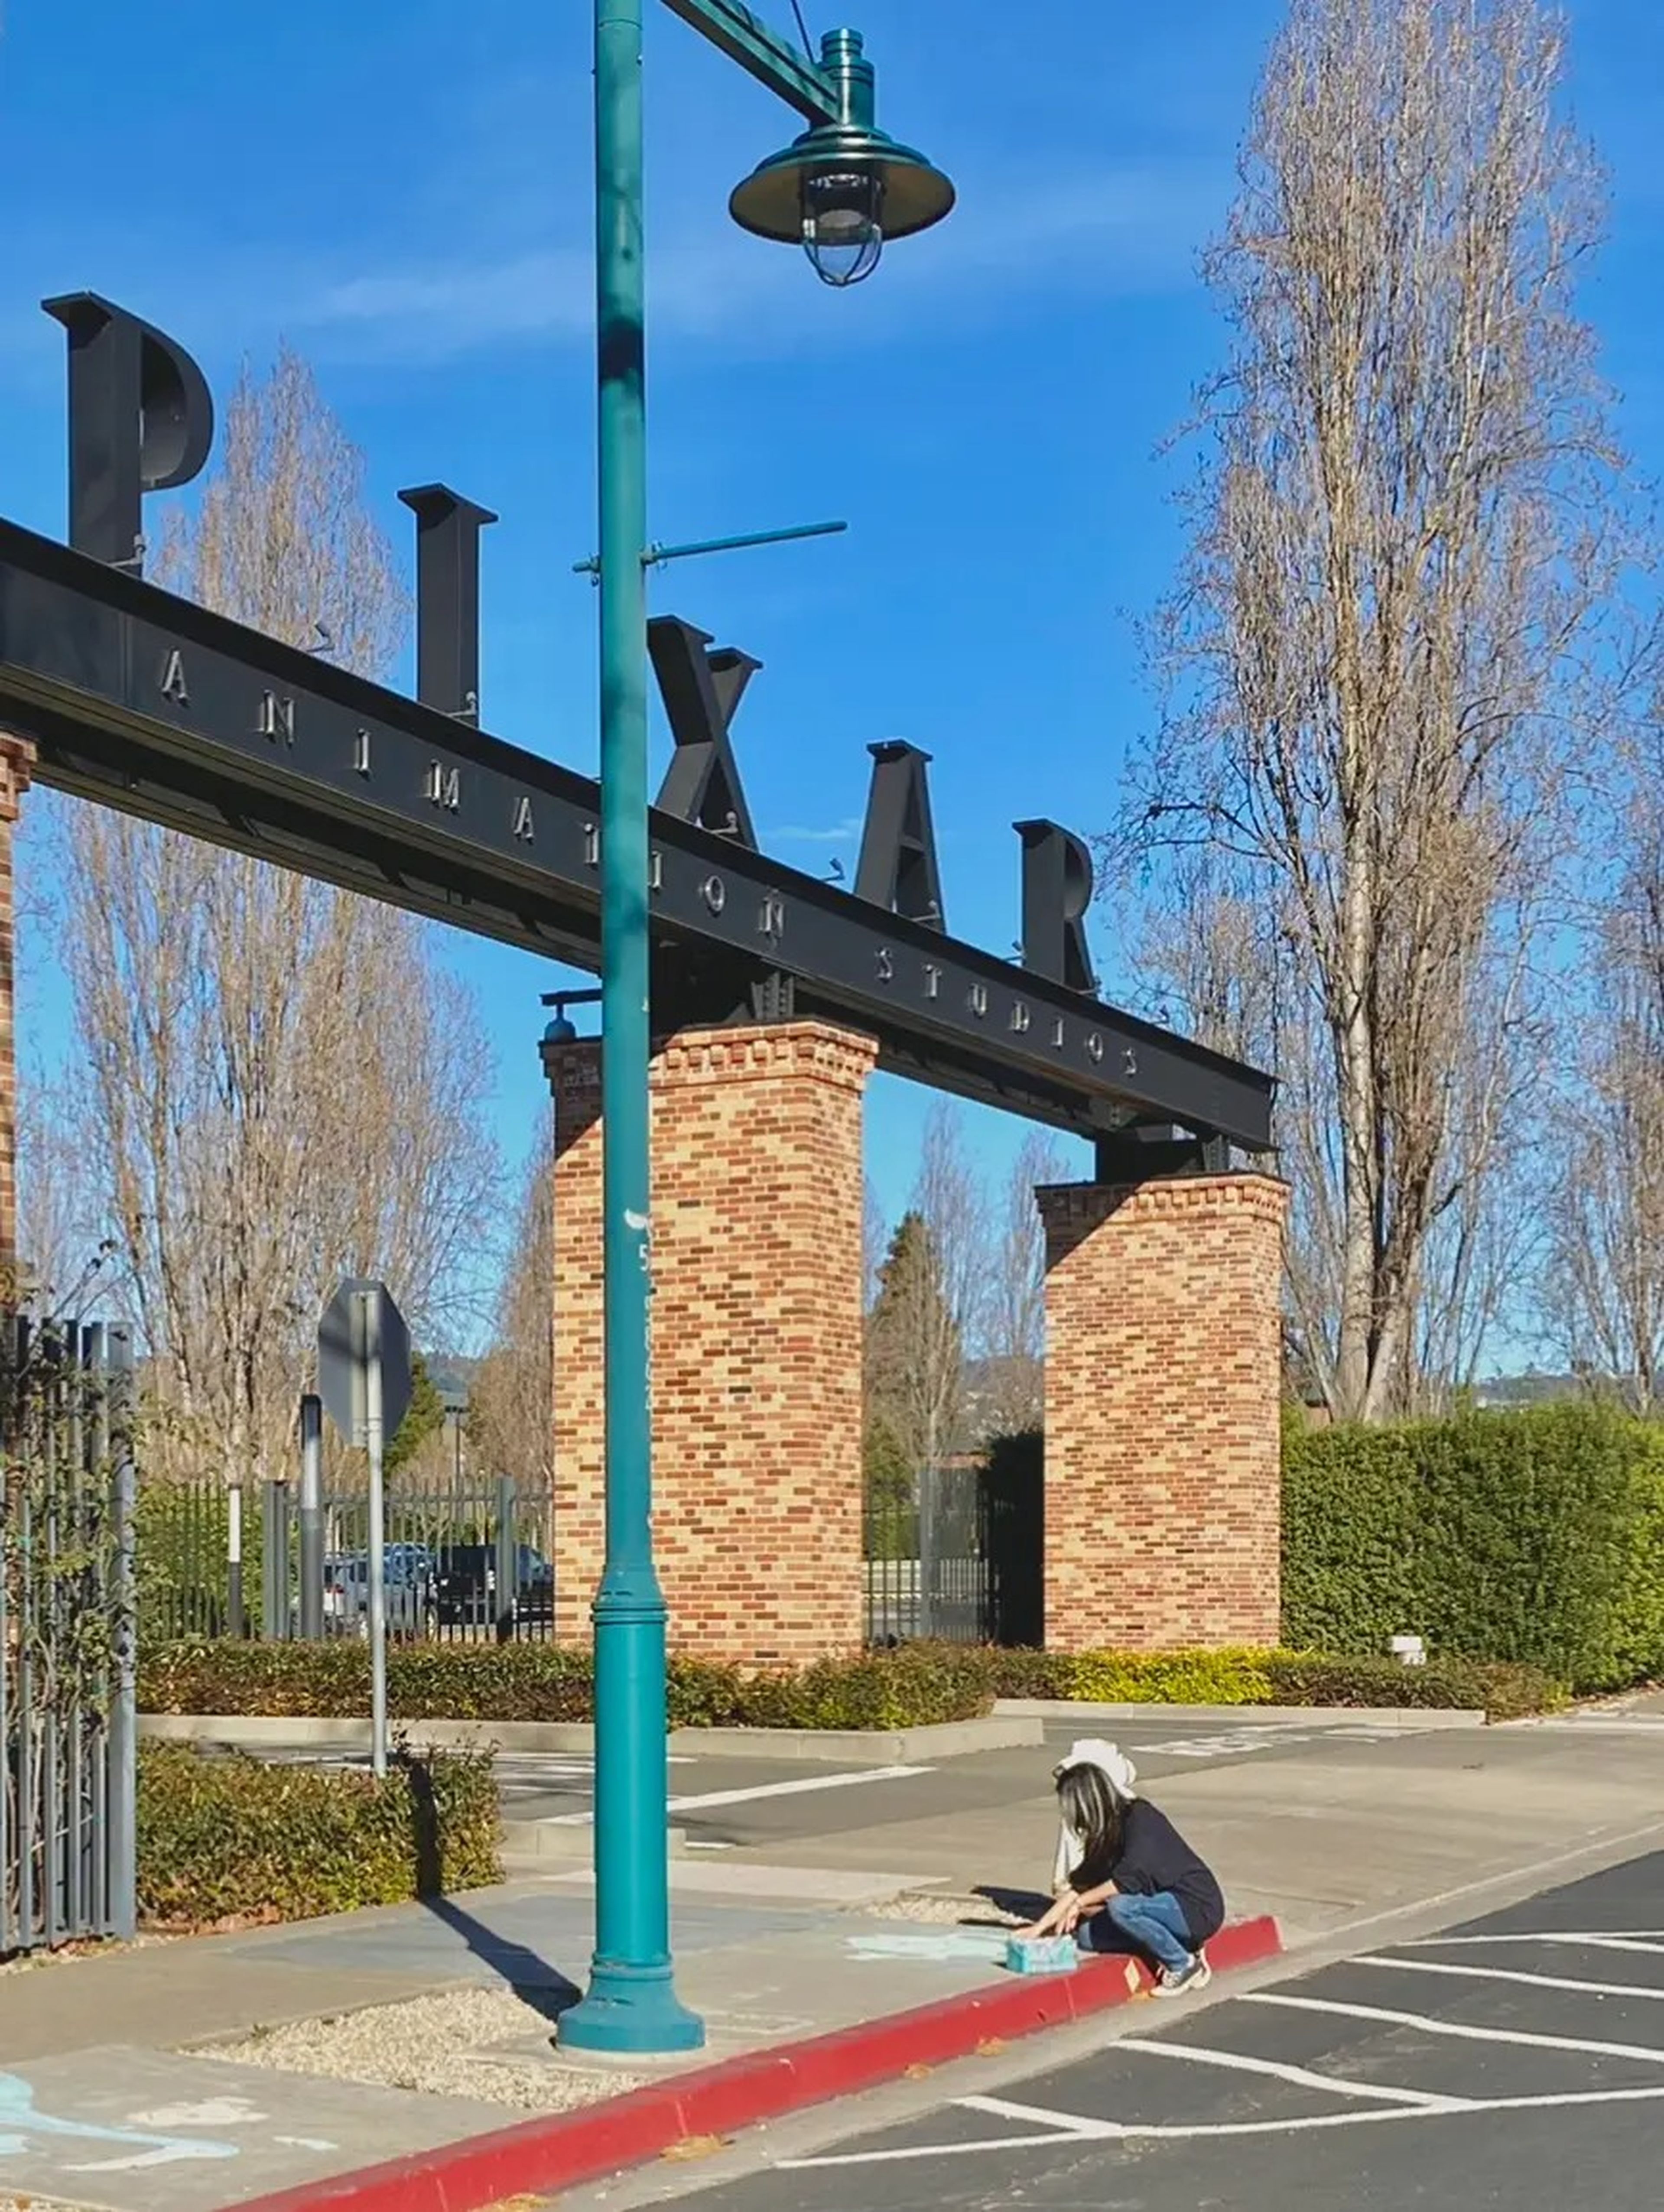 Plascencia drawing in front of Pixar's headquarters.